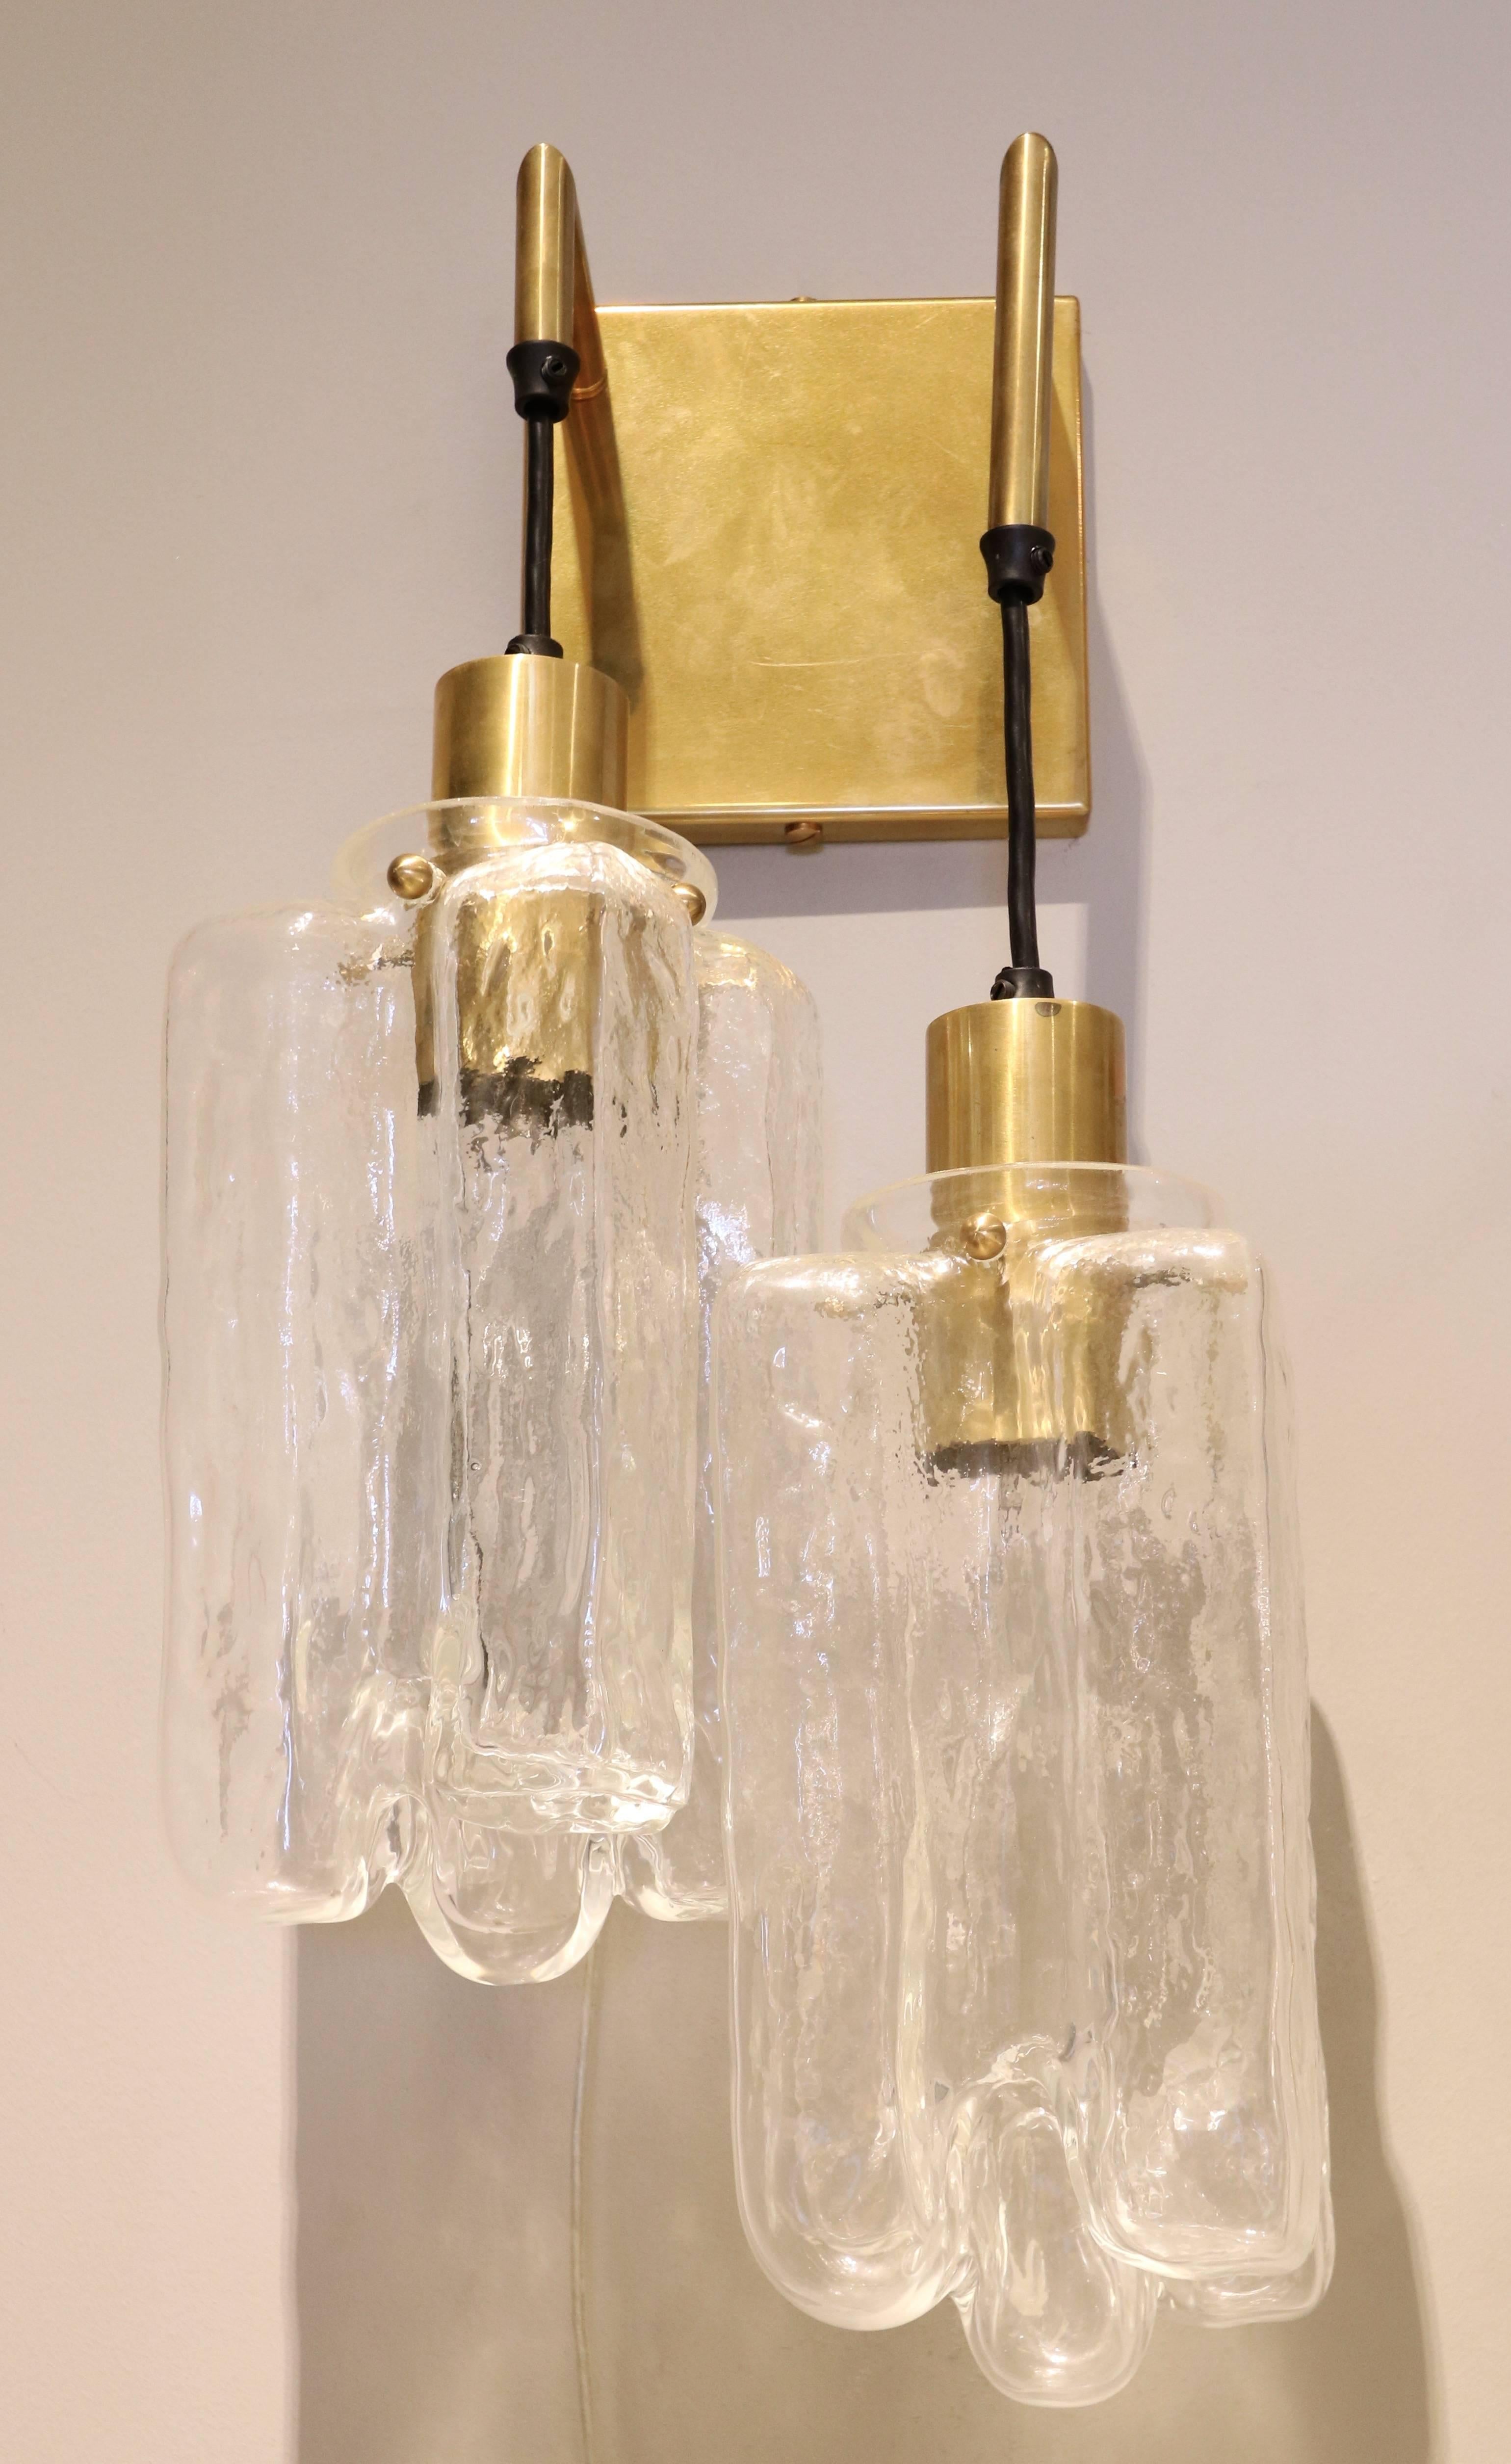 Pair of Kalmar glass sconces from the 1960s with brass wall plate and sockets.
    